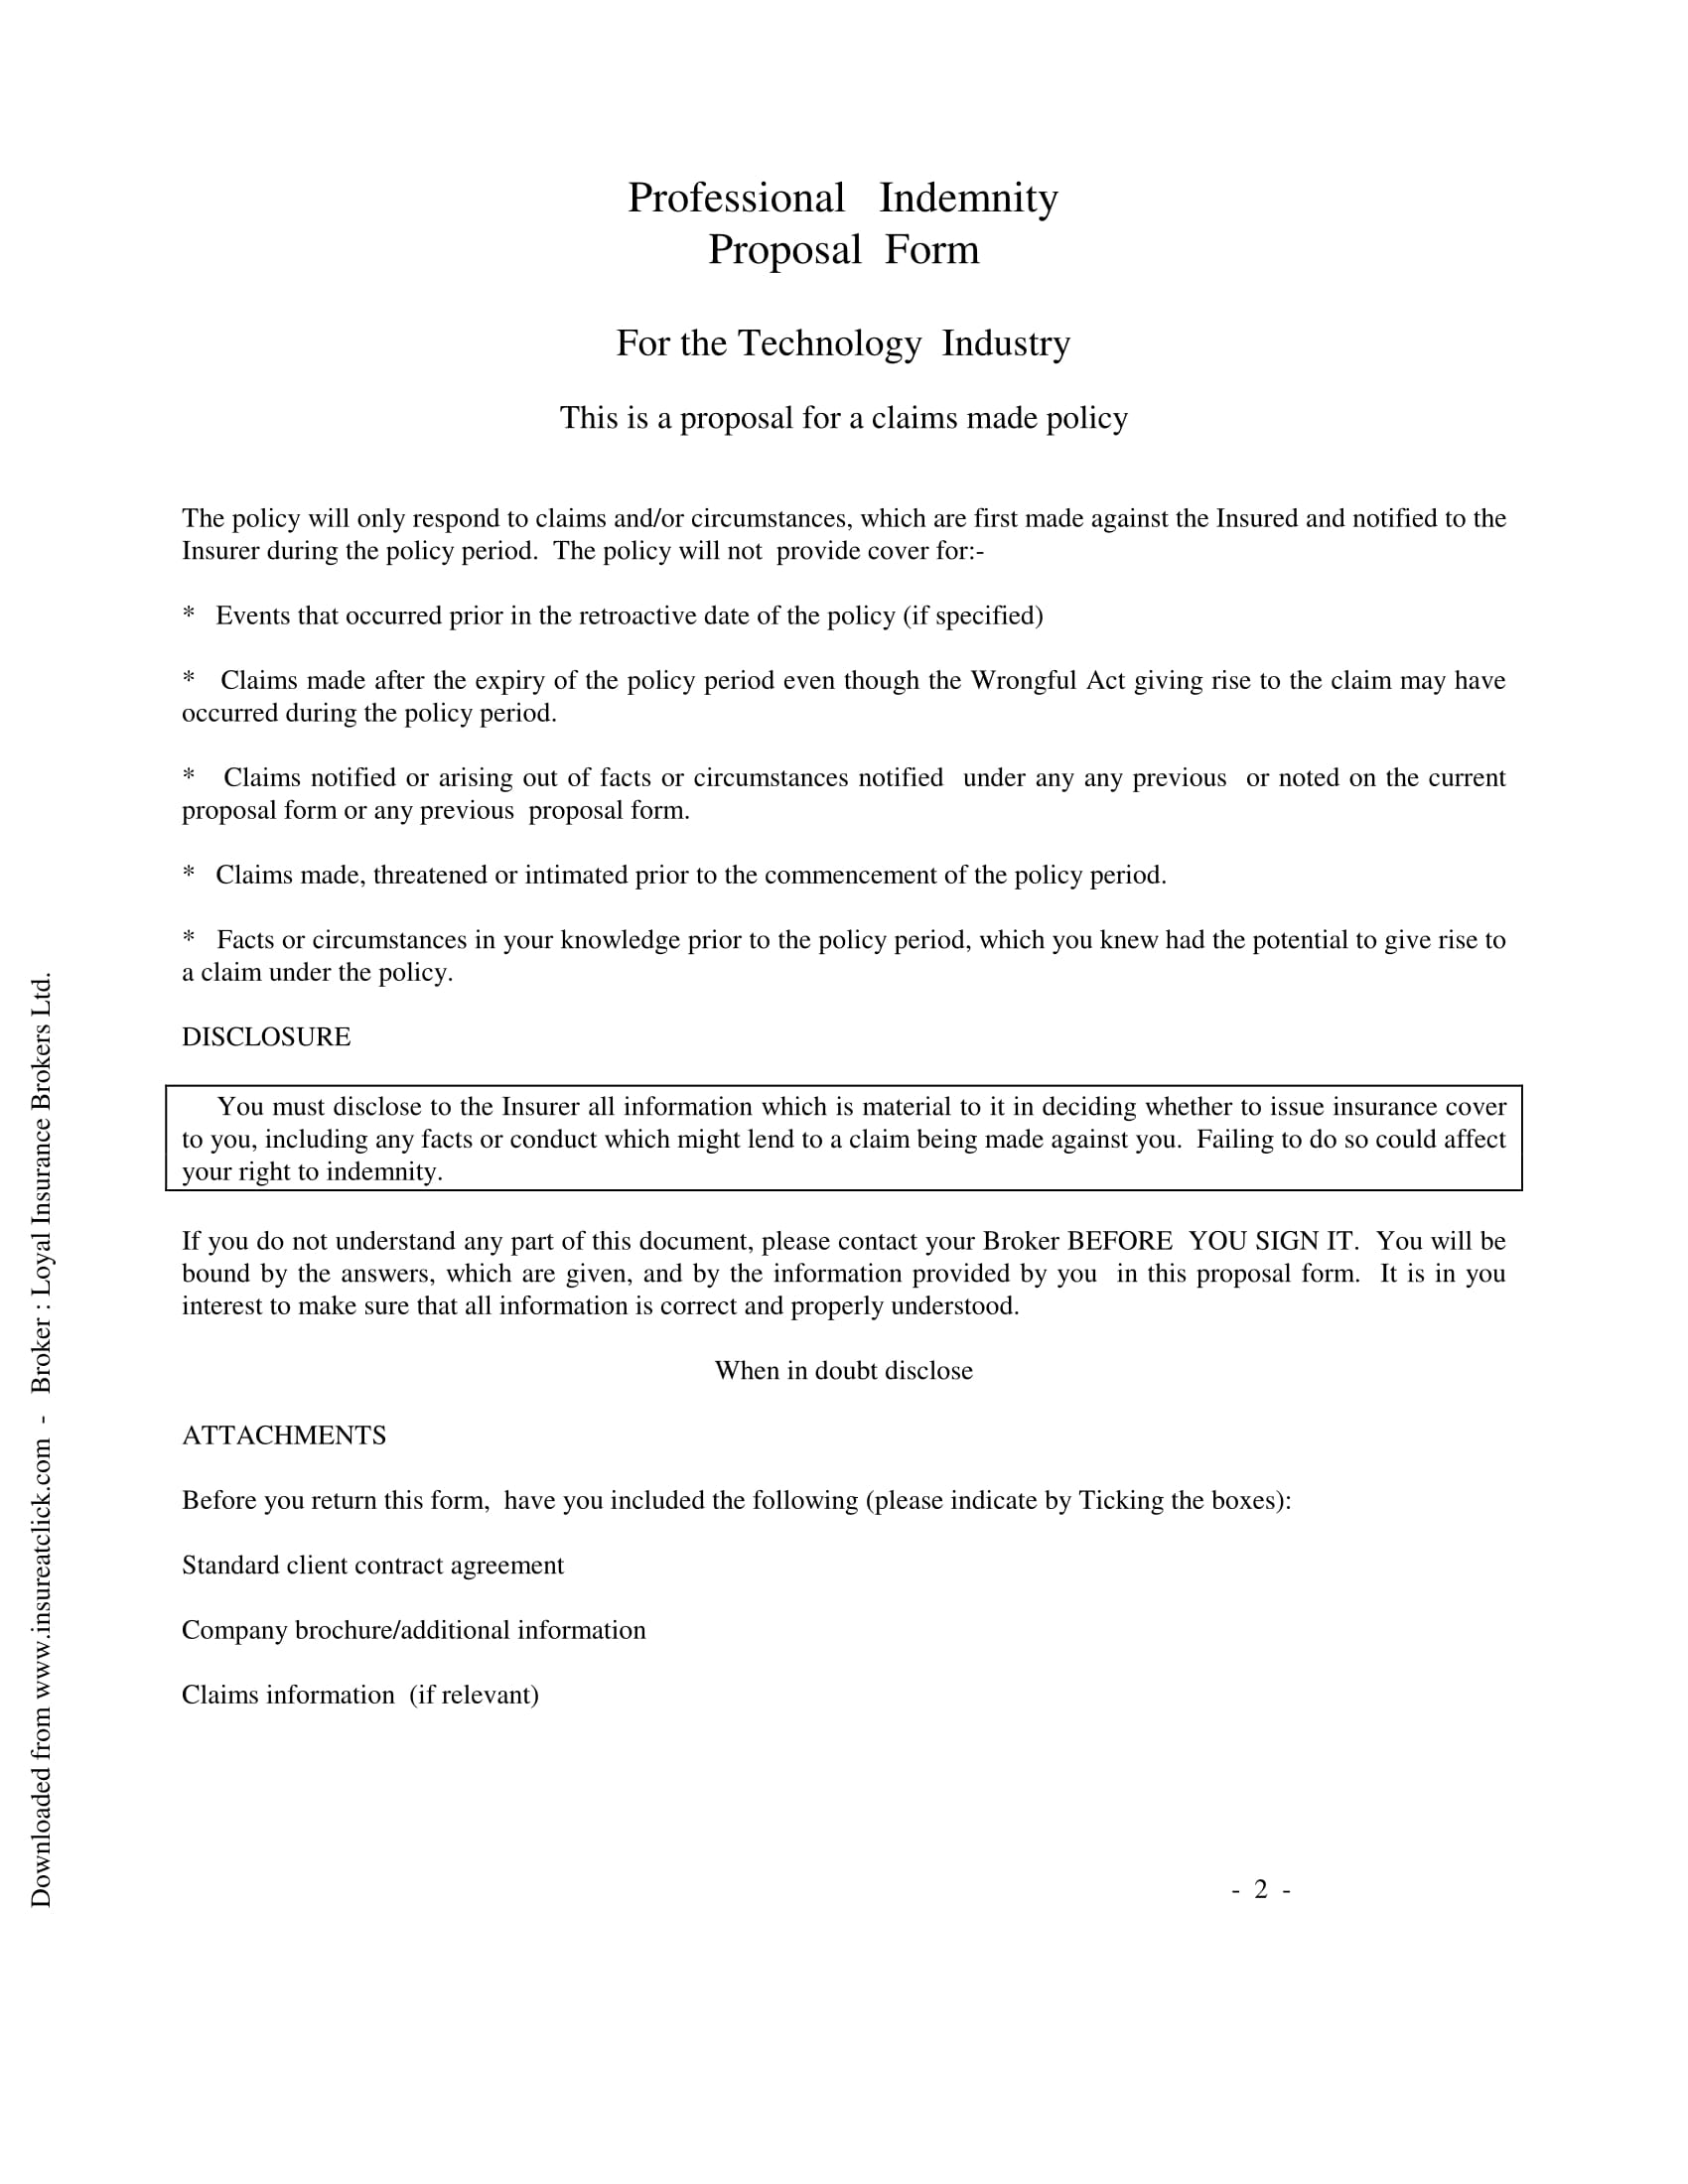 professional indemnity proposal form 1